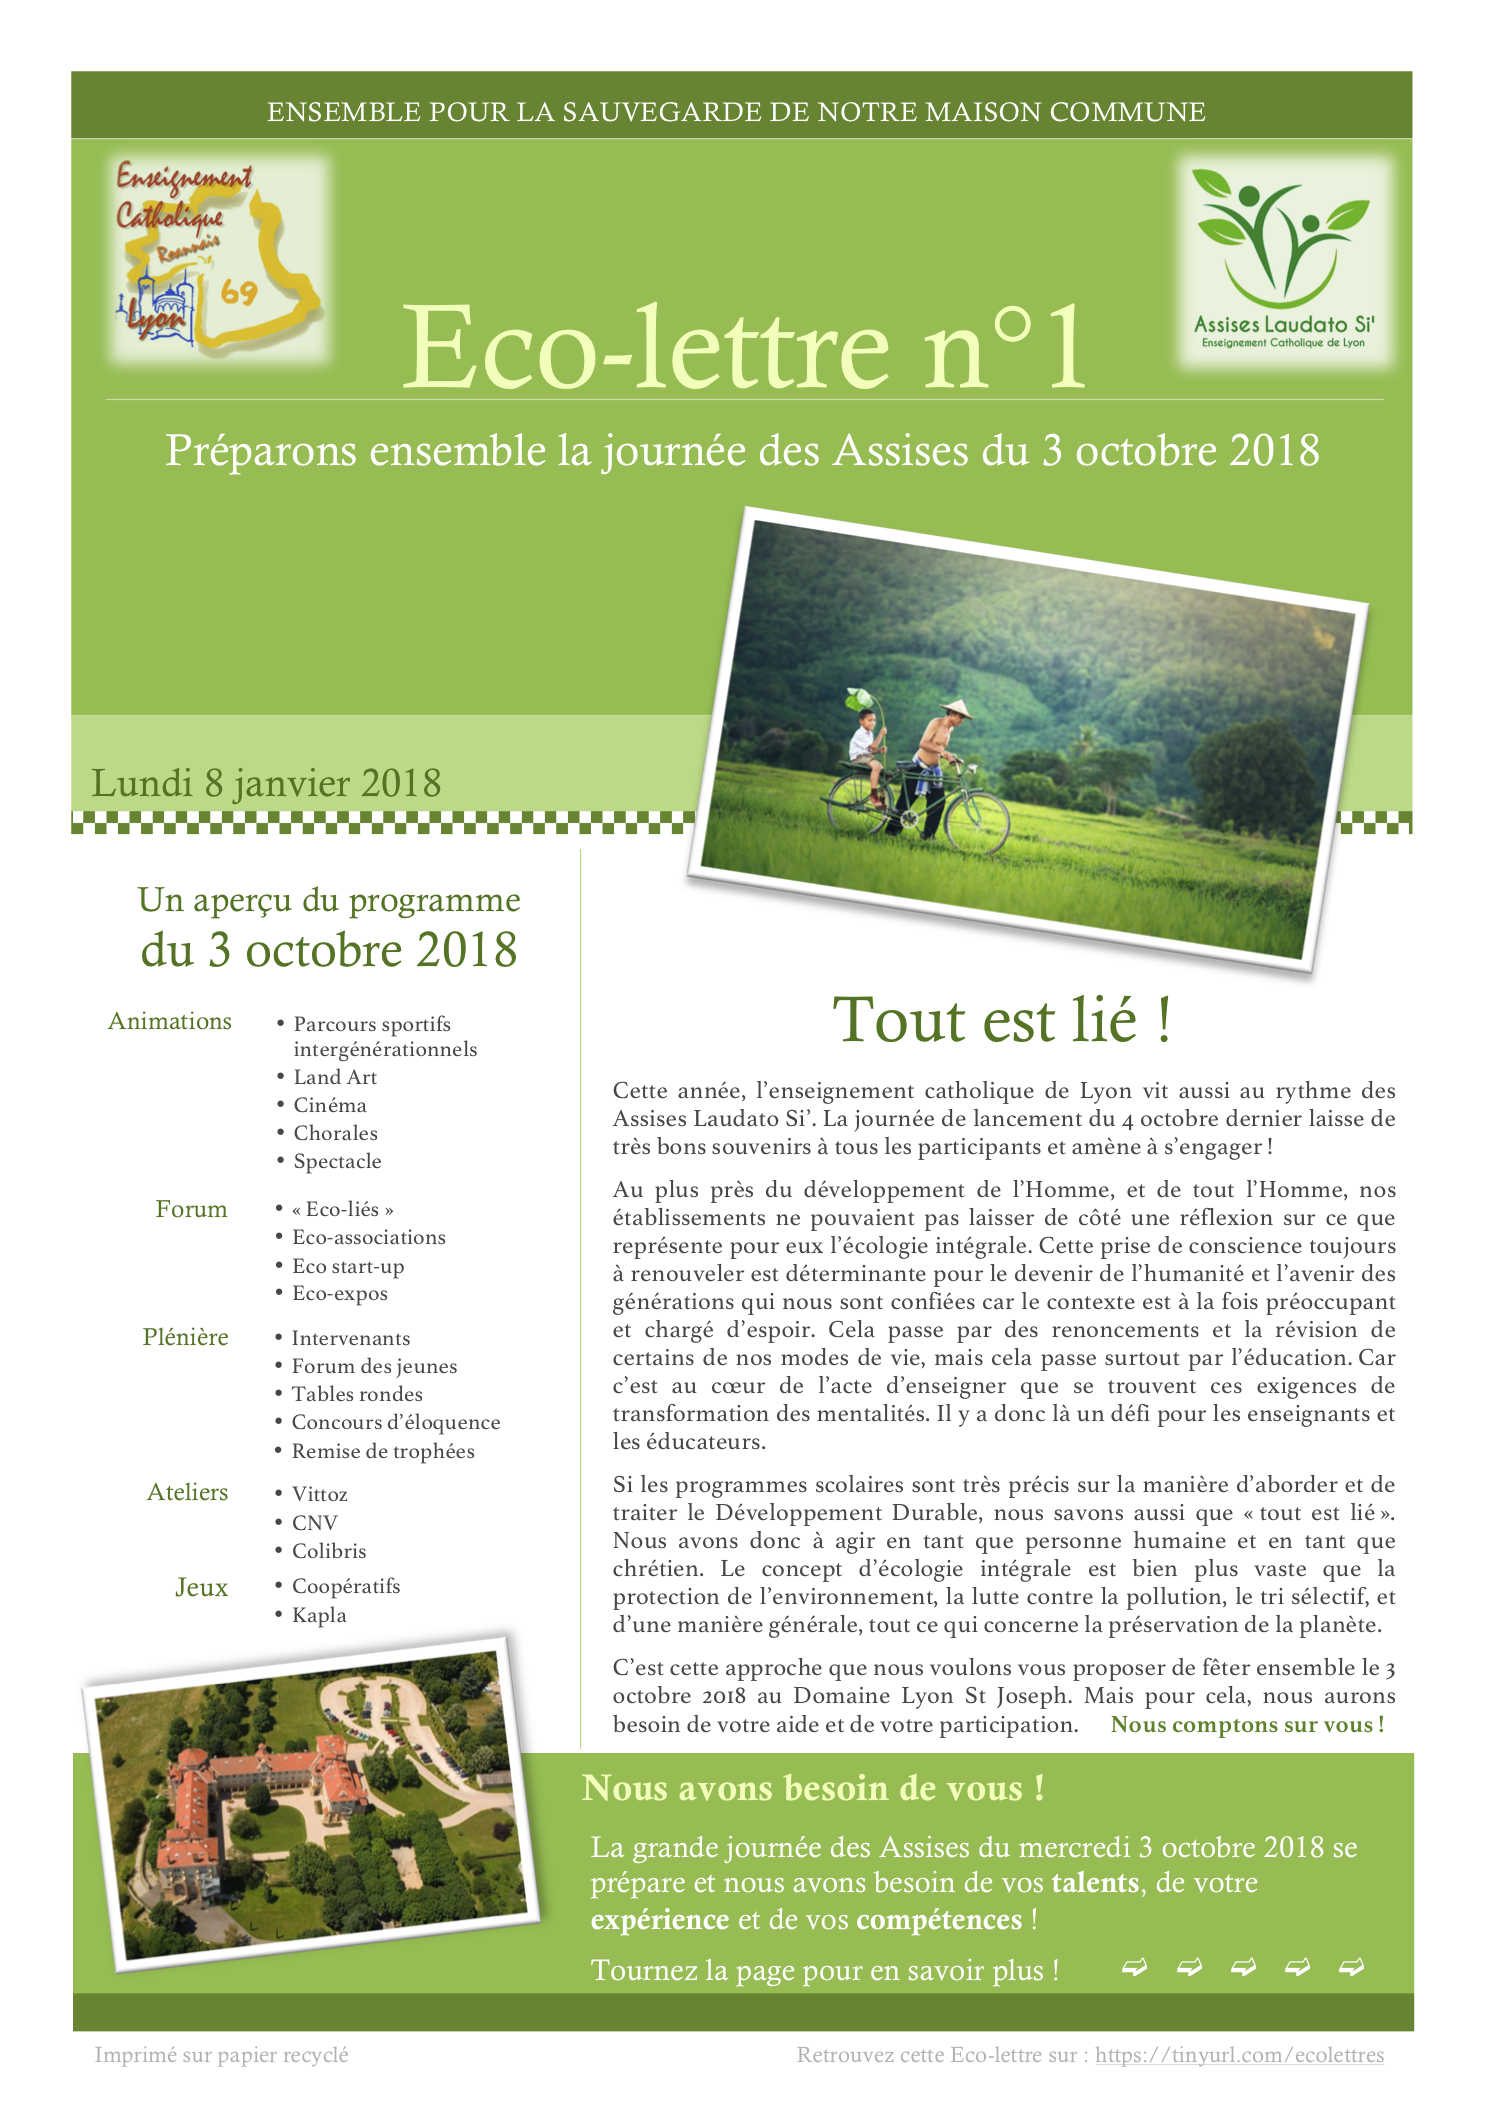 Eco lettre n°1a